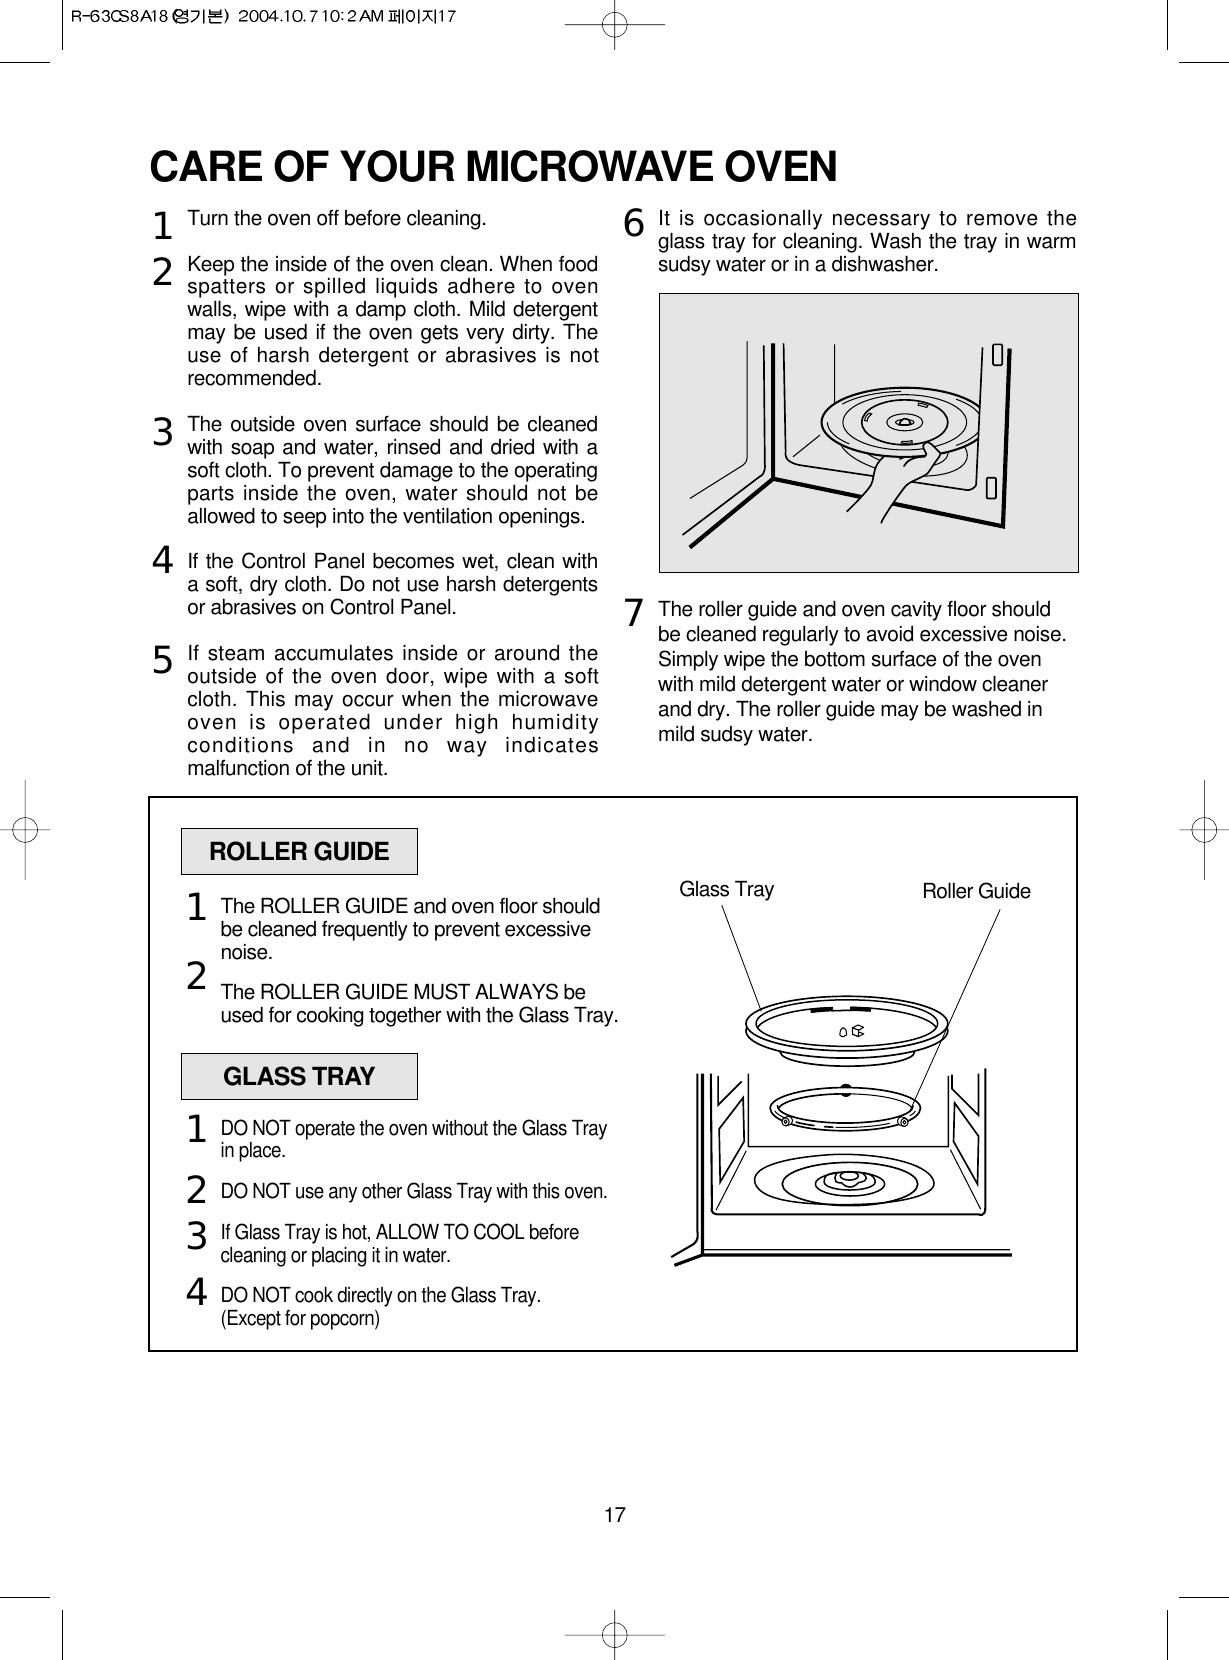 17CARE OF YOUR MICROWAVE OVENTurn the oven off before cleaning.Keep the inside of the oven clean. When foodspatters or spilled liquids adhere to ovenwalls, wipe with a damp cloth. Mild detergentmay be used if the oven gets very dirty. Theuse of harsh detergent or abrasives is notrecommended.The outside oven surface should be cleanedwith soap and water, rinsed and dried with asoft cloth. To prevent damage to the operatingparts inside the oven, water should not beallowed to seep into the ventilation openings.If the Control Panel becomes wet, clean witha soft, dry cloth. Do not use harsh detergentsor abrasives on Control Panel.If steam accumulates inside or around theoutside of the oven door, wipe with a softcloth. This may occur when the microwaveoven is operated under high humidityconditions and in no way indicatesmalfunction of the unit.It is occasionally necessary to remove theglass tray for cleaning. Wash the tray in warmsudsy water or in a dishwasher.The roller guide and oven cavity floor shouldbe cleaned regularly to avoid excessive noise. Simply wipe the bottom surface of the ovenwith mild detergent water or window cleanerand dry. The roller guide may be washed inmild sudsy water.1234567ROLLER GUIDEGlass Tray Roller GuideThe ROLLER GUIDE and oven floor shouldbe cleaned frequently to prevent excessivenoise.The ROLLER GUIDE MUST ALWAYS beused for cooking together with the Glass Tray.12GLASS TRAYDO NOT operate the oven without the Glass Trayin place.DO NOT use any other Glass Tray with this oven.If Glass Tray is hot, ALLOW TO COOL beforecleaning or placing it in water.DO NOT cook directly on the Glass Tray.(Except for popcorn)1234